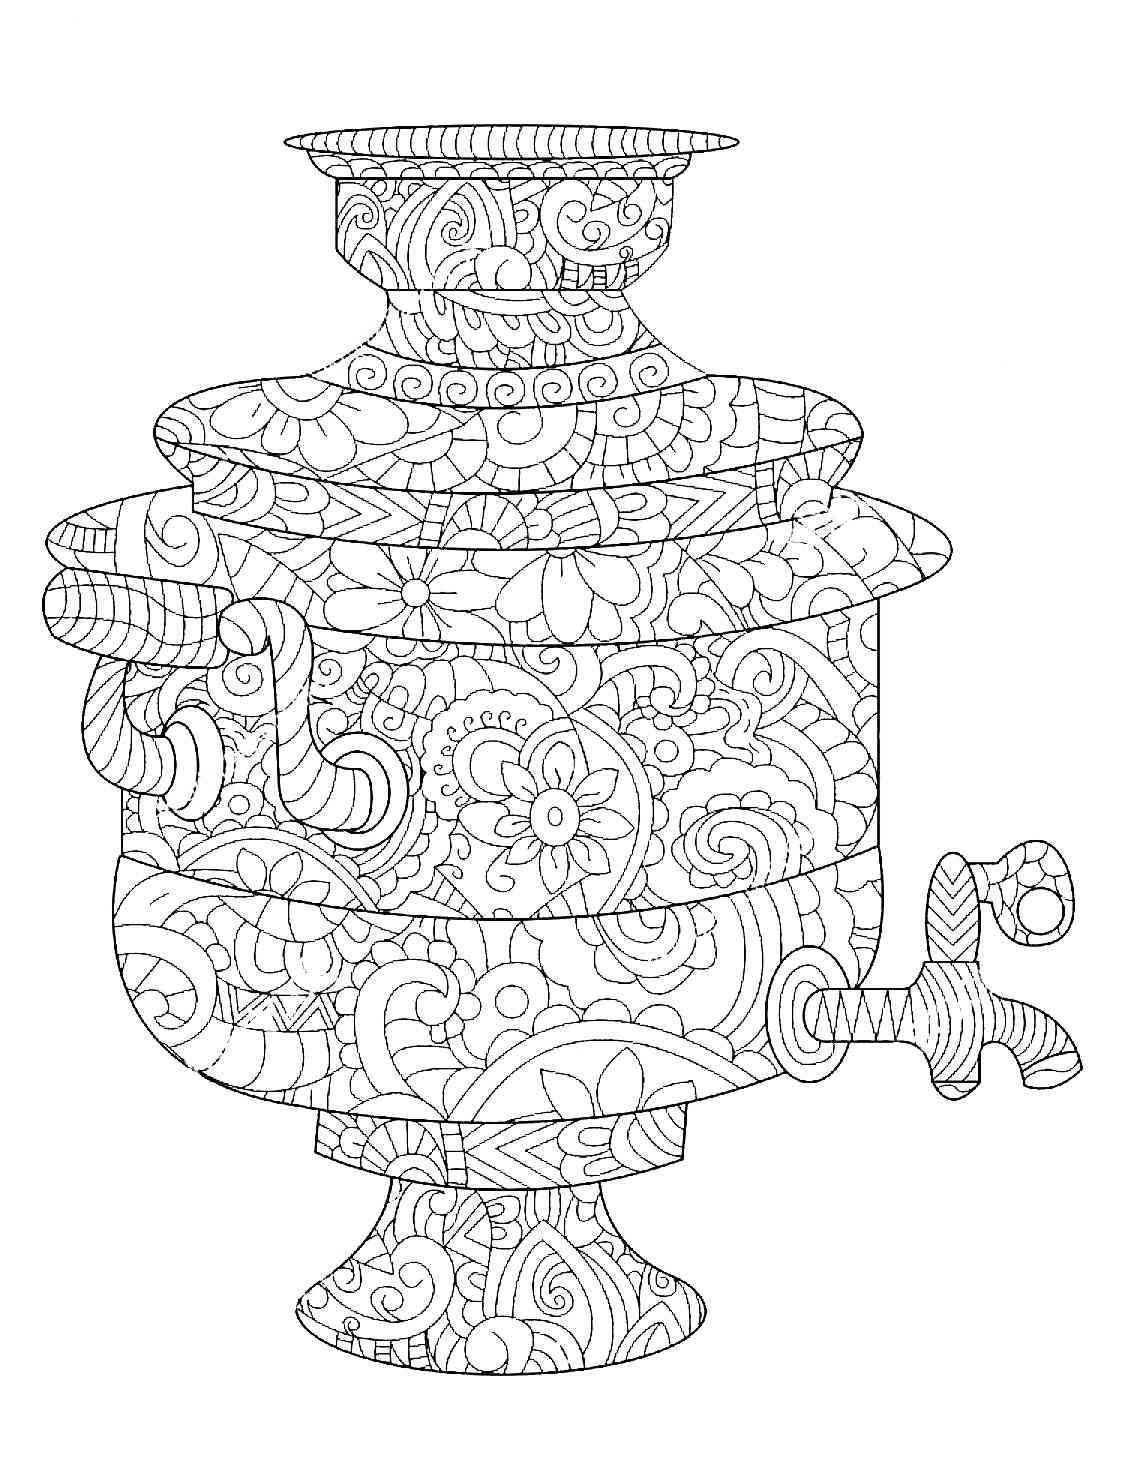 Teapot coloring pages for adults